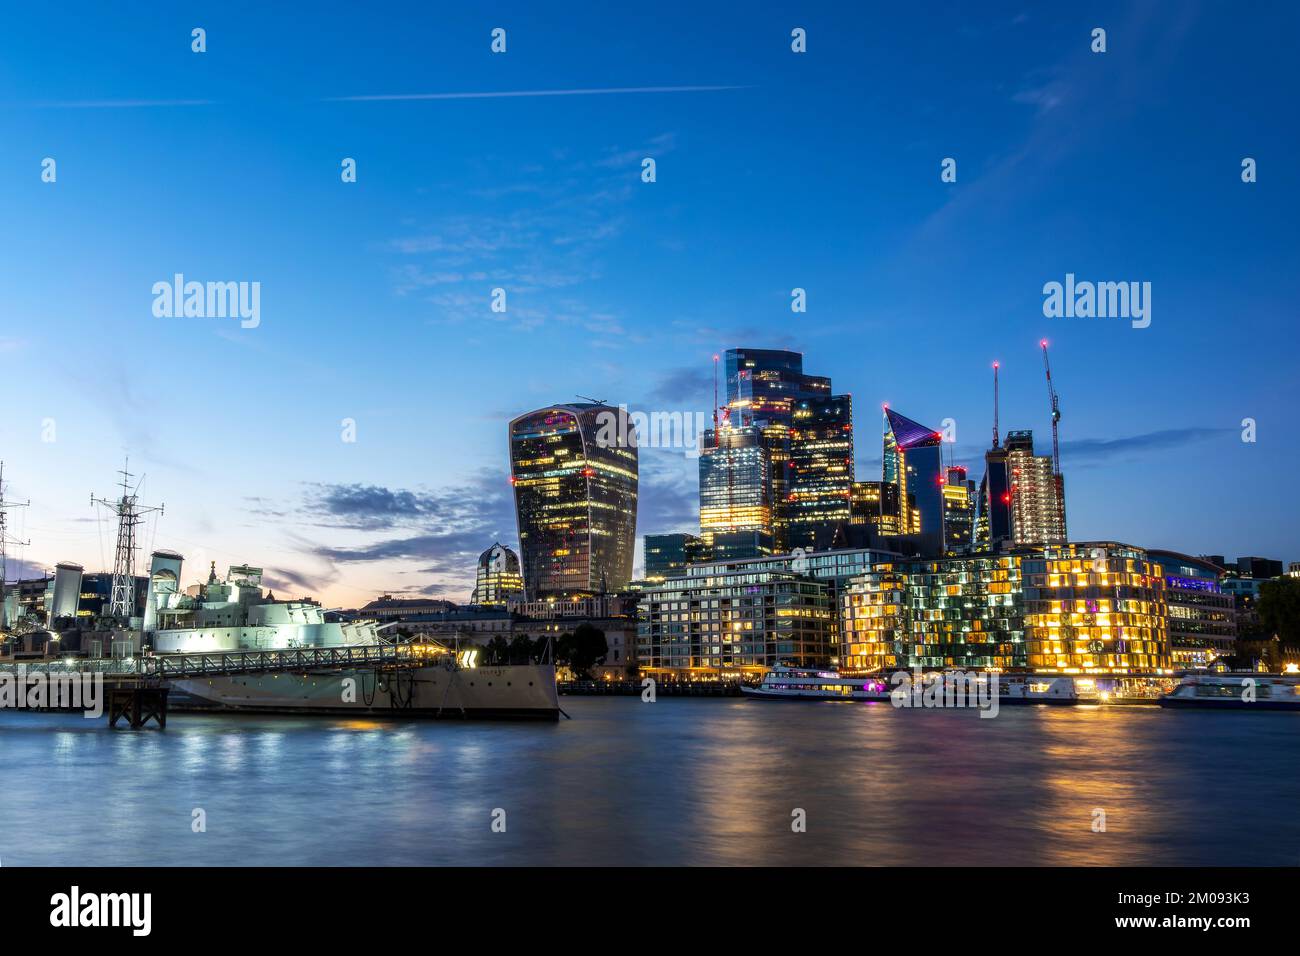 HMS Belfast war ship and the City at night, in London, UK Stock Photo